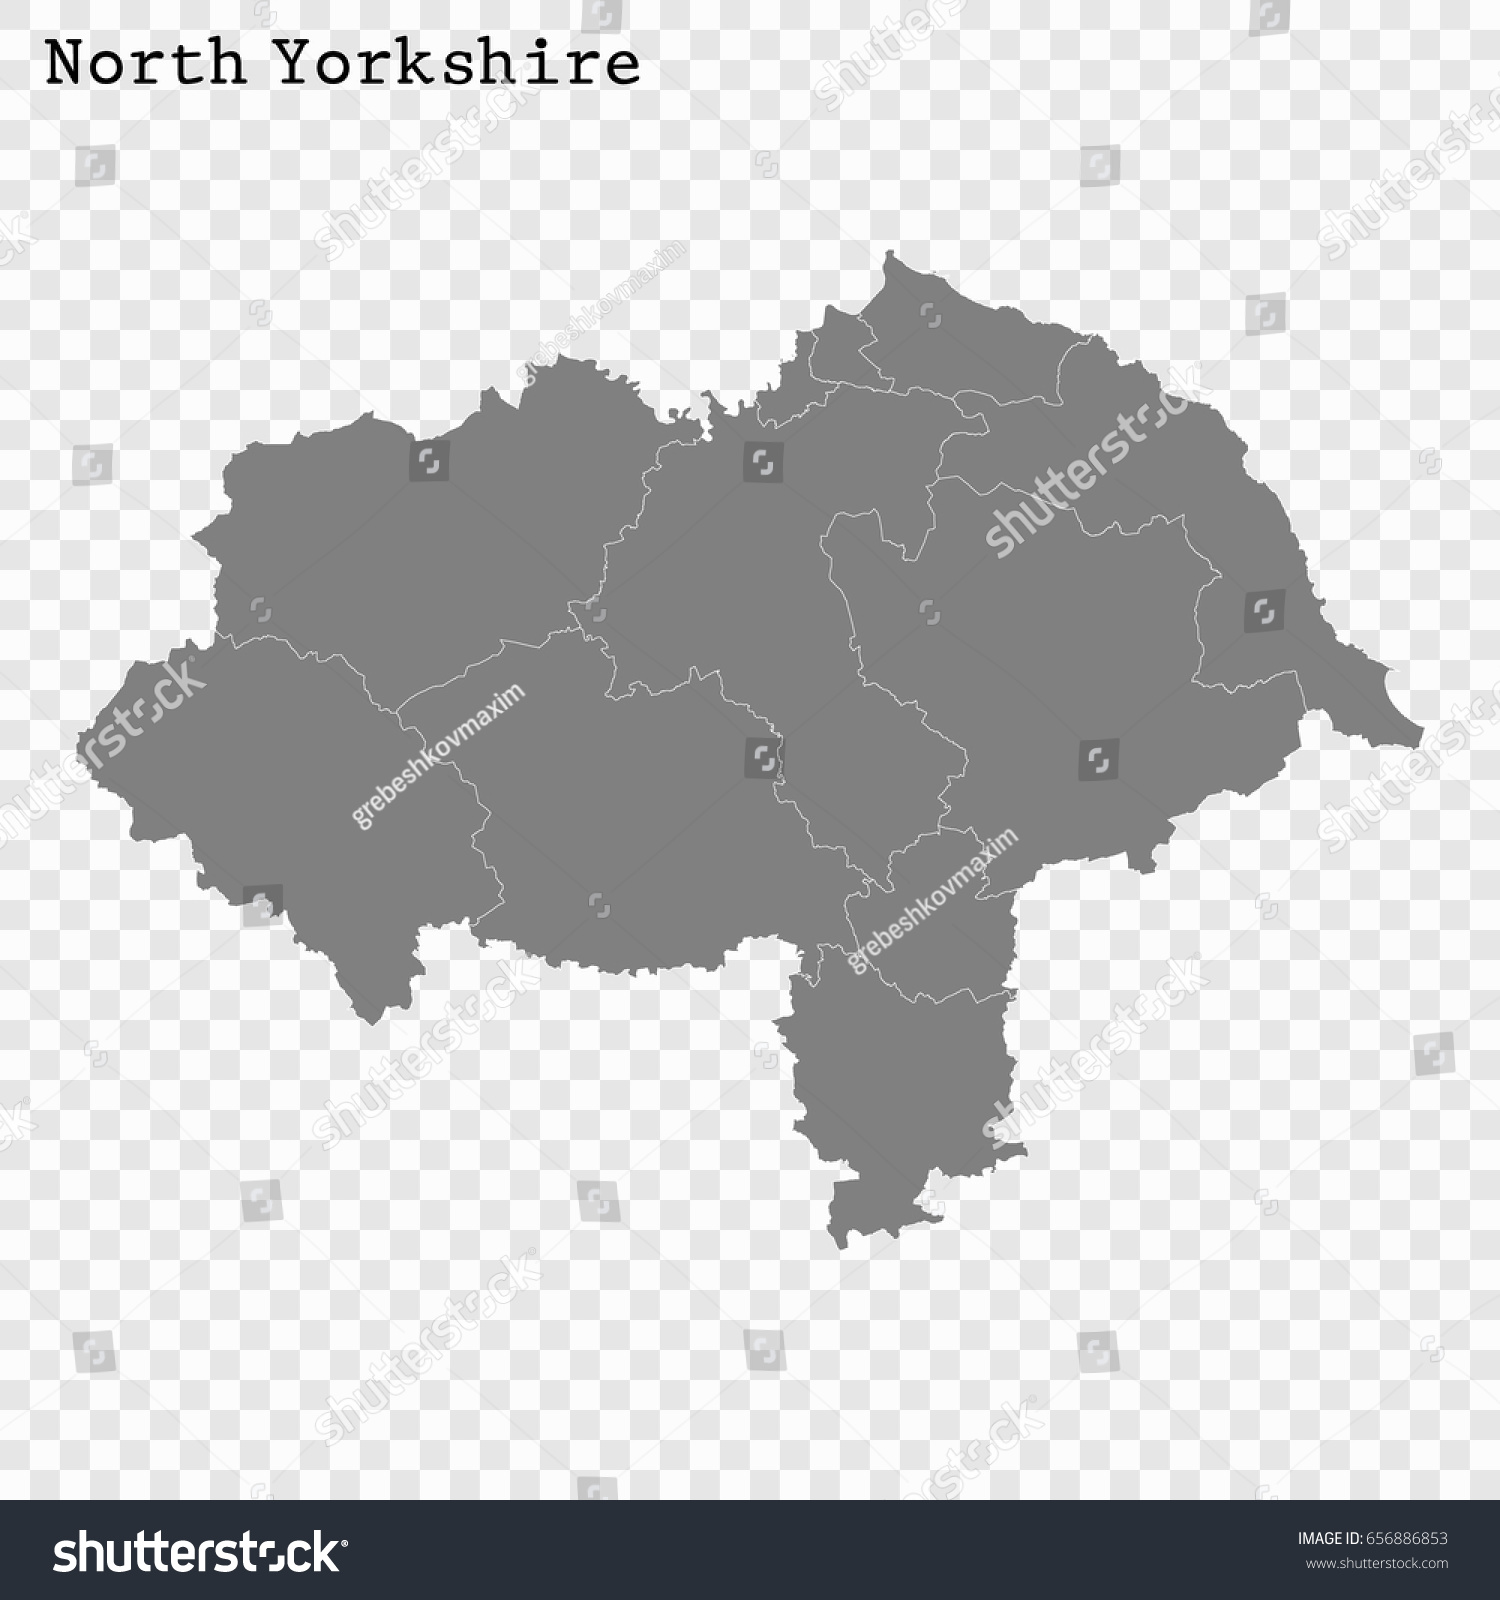 SVG of High Quality map of North Yorkshire is a ceremonial county of England, with borders of the counties svg